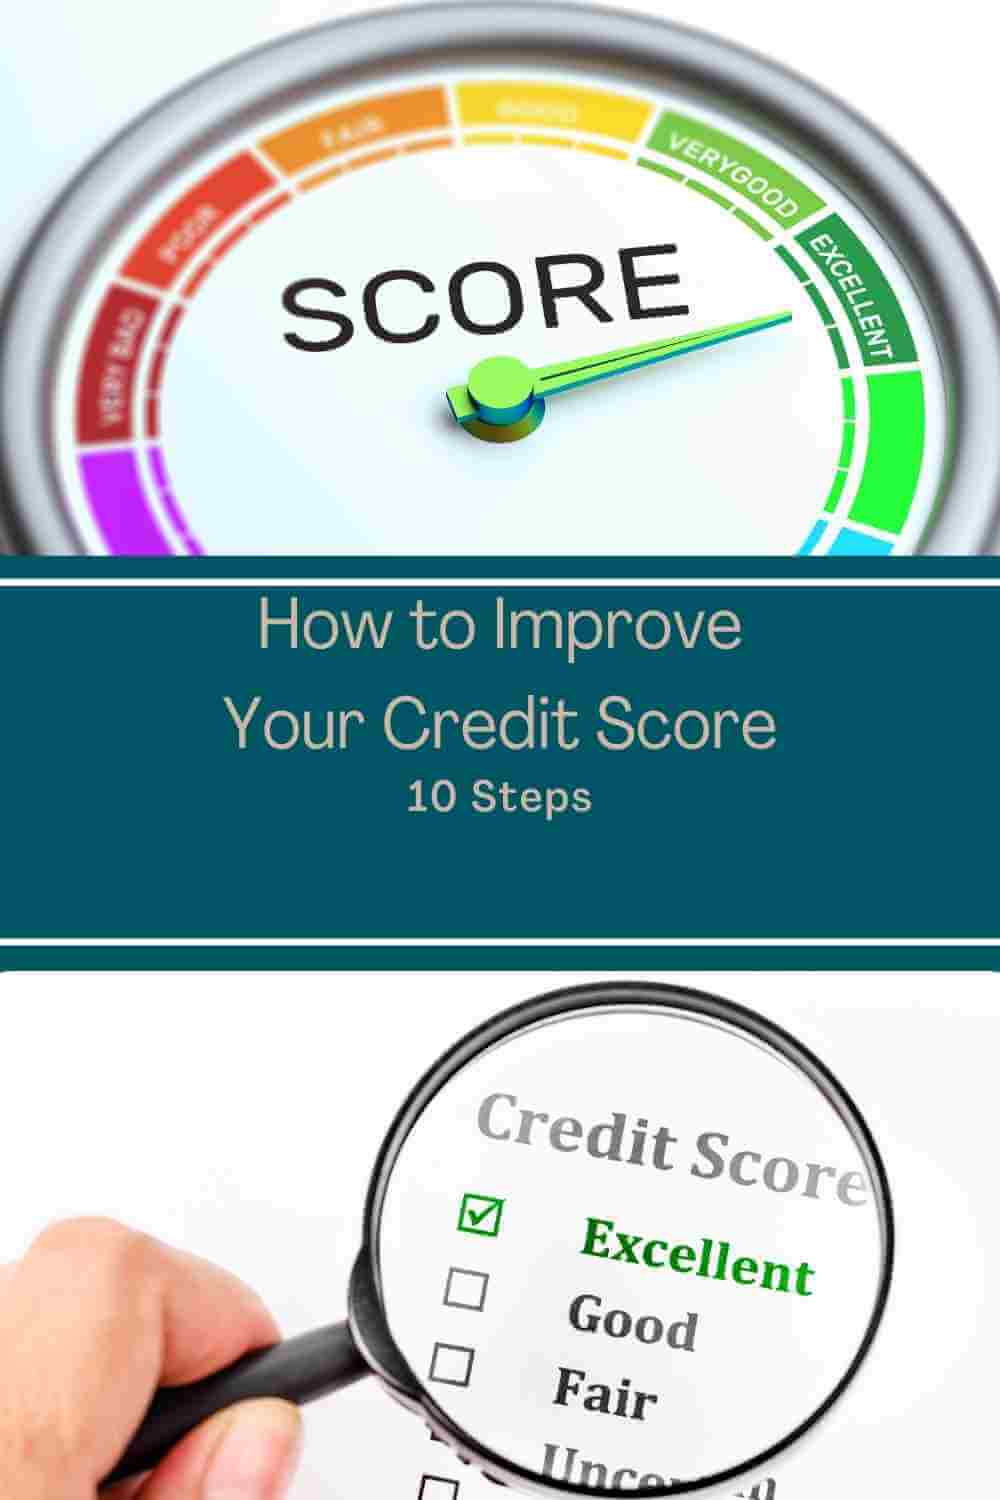 Person reviewing credit report and taking notes, symbolizing the step-by-step process to improve credit scores